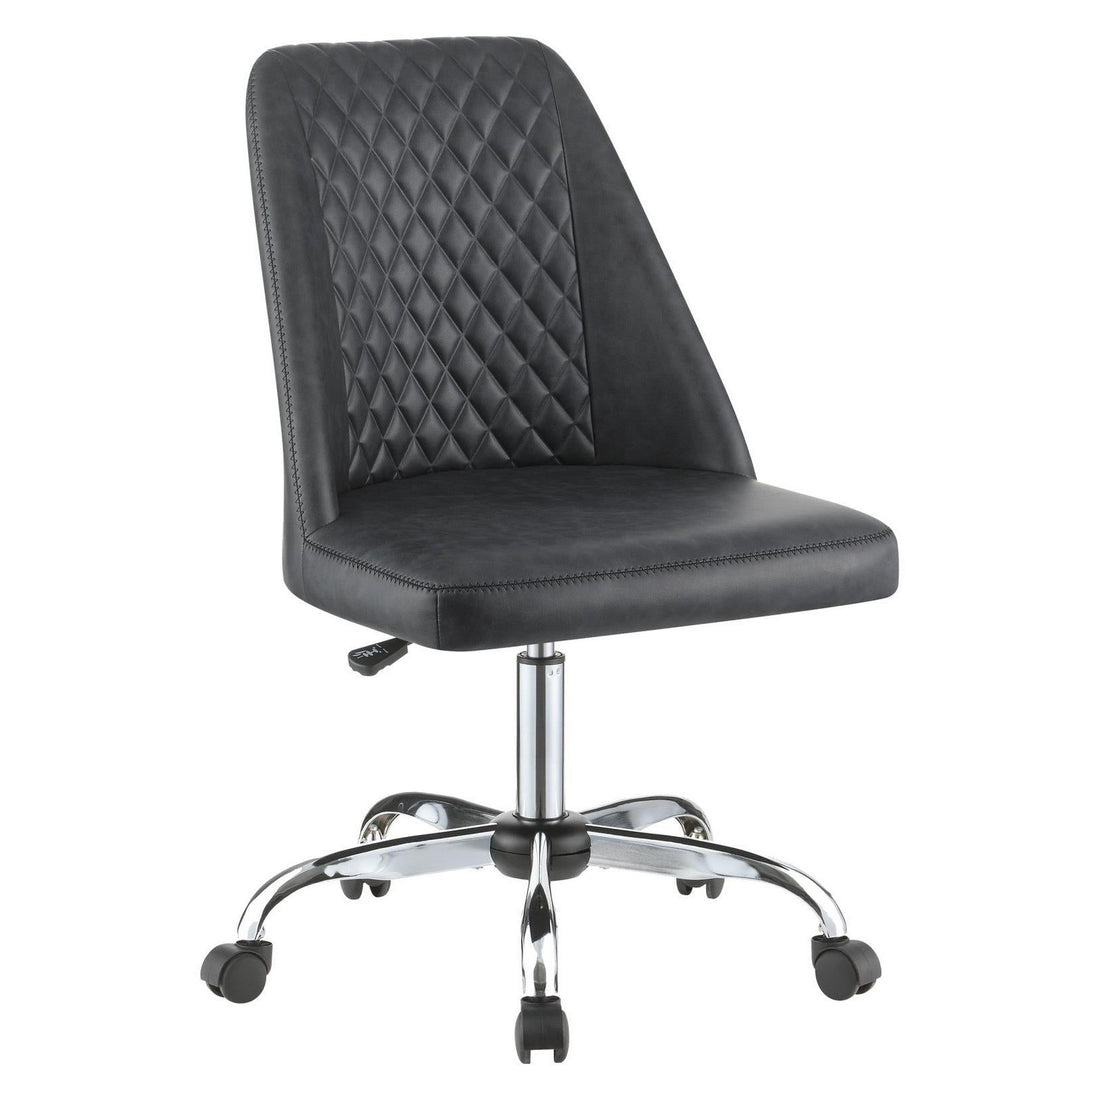 Althea Upholstered Tufted Back Office Chair Grey and Chrome 881196